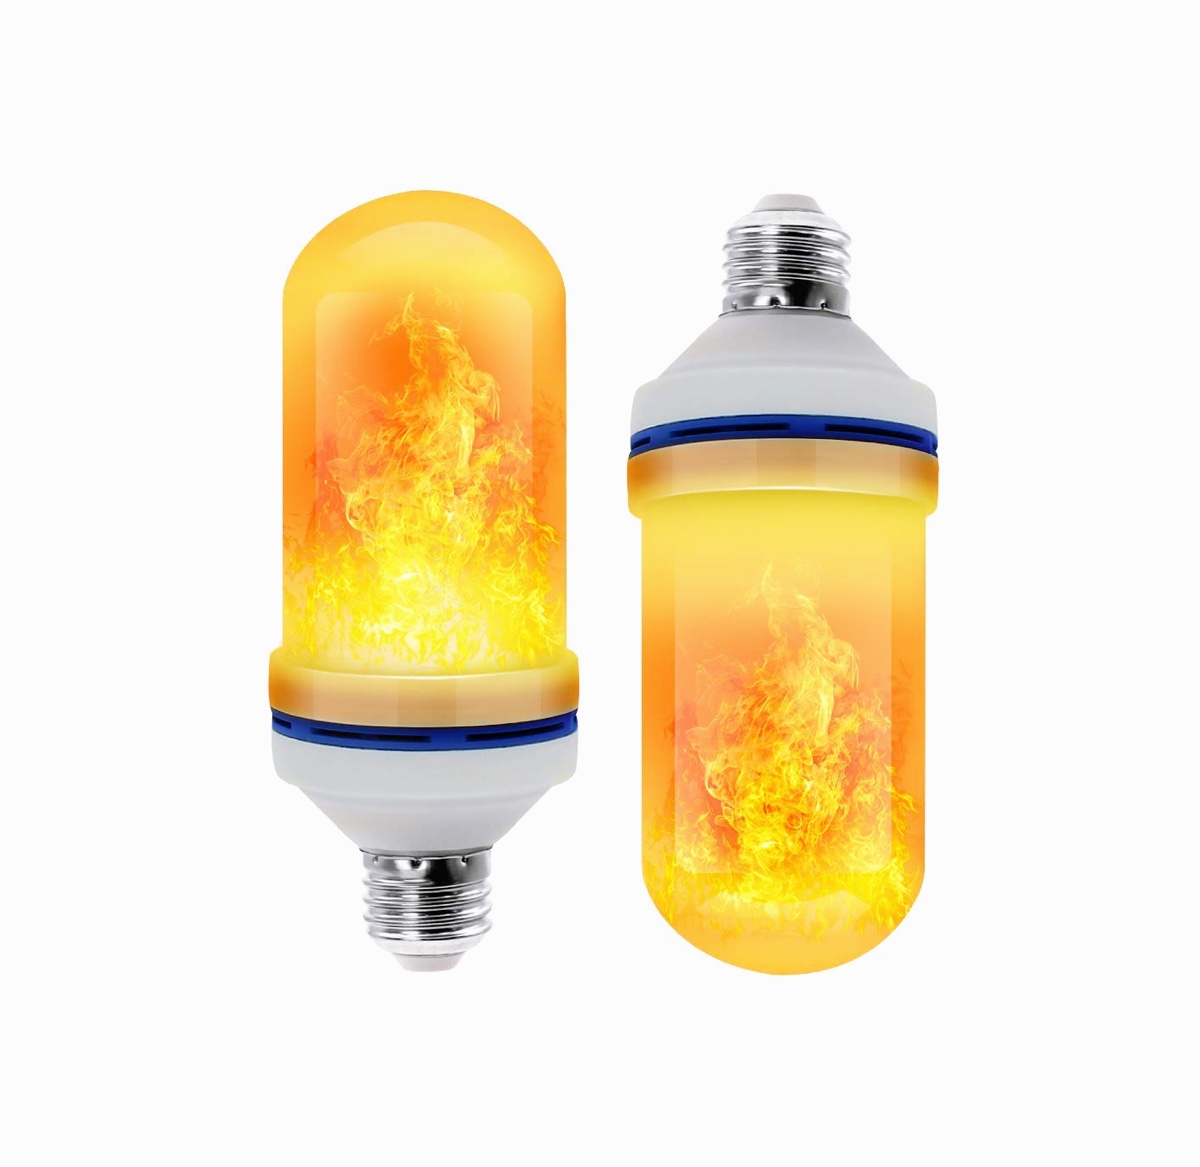 Product Of The Week: Super Realistic LED Fire Bulb